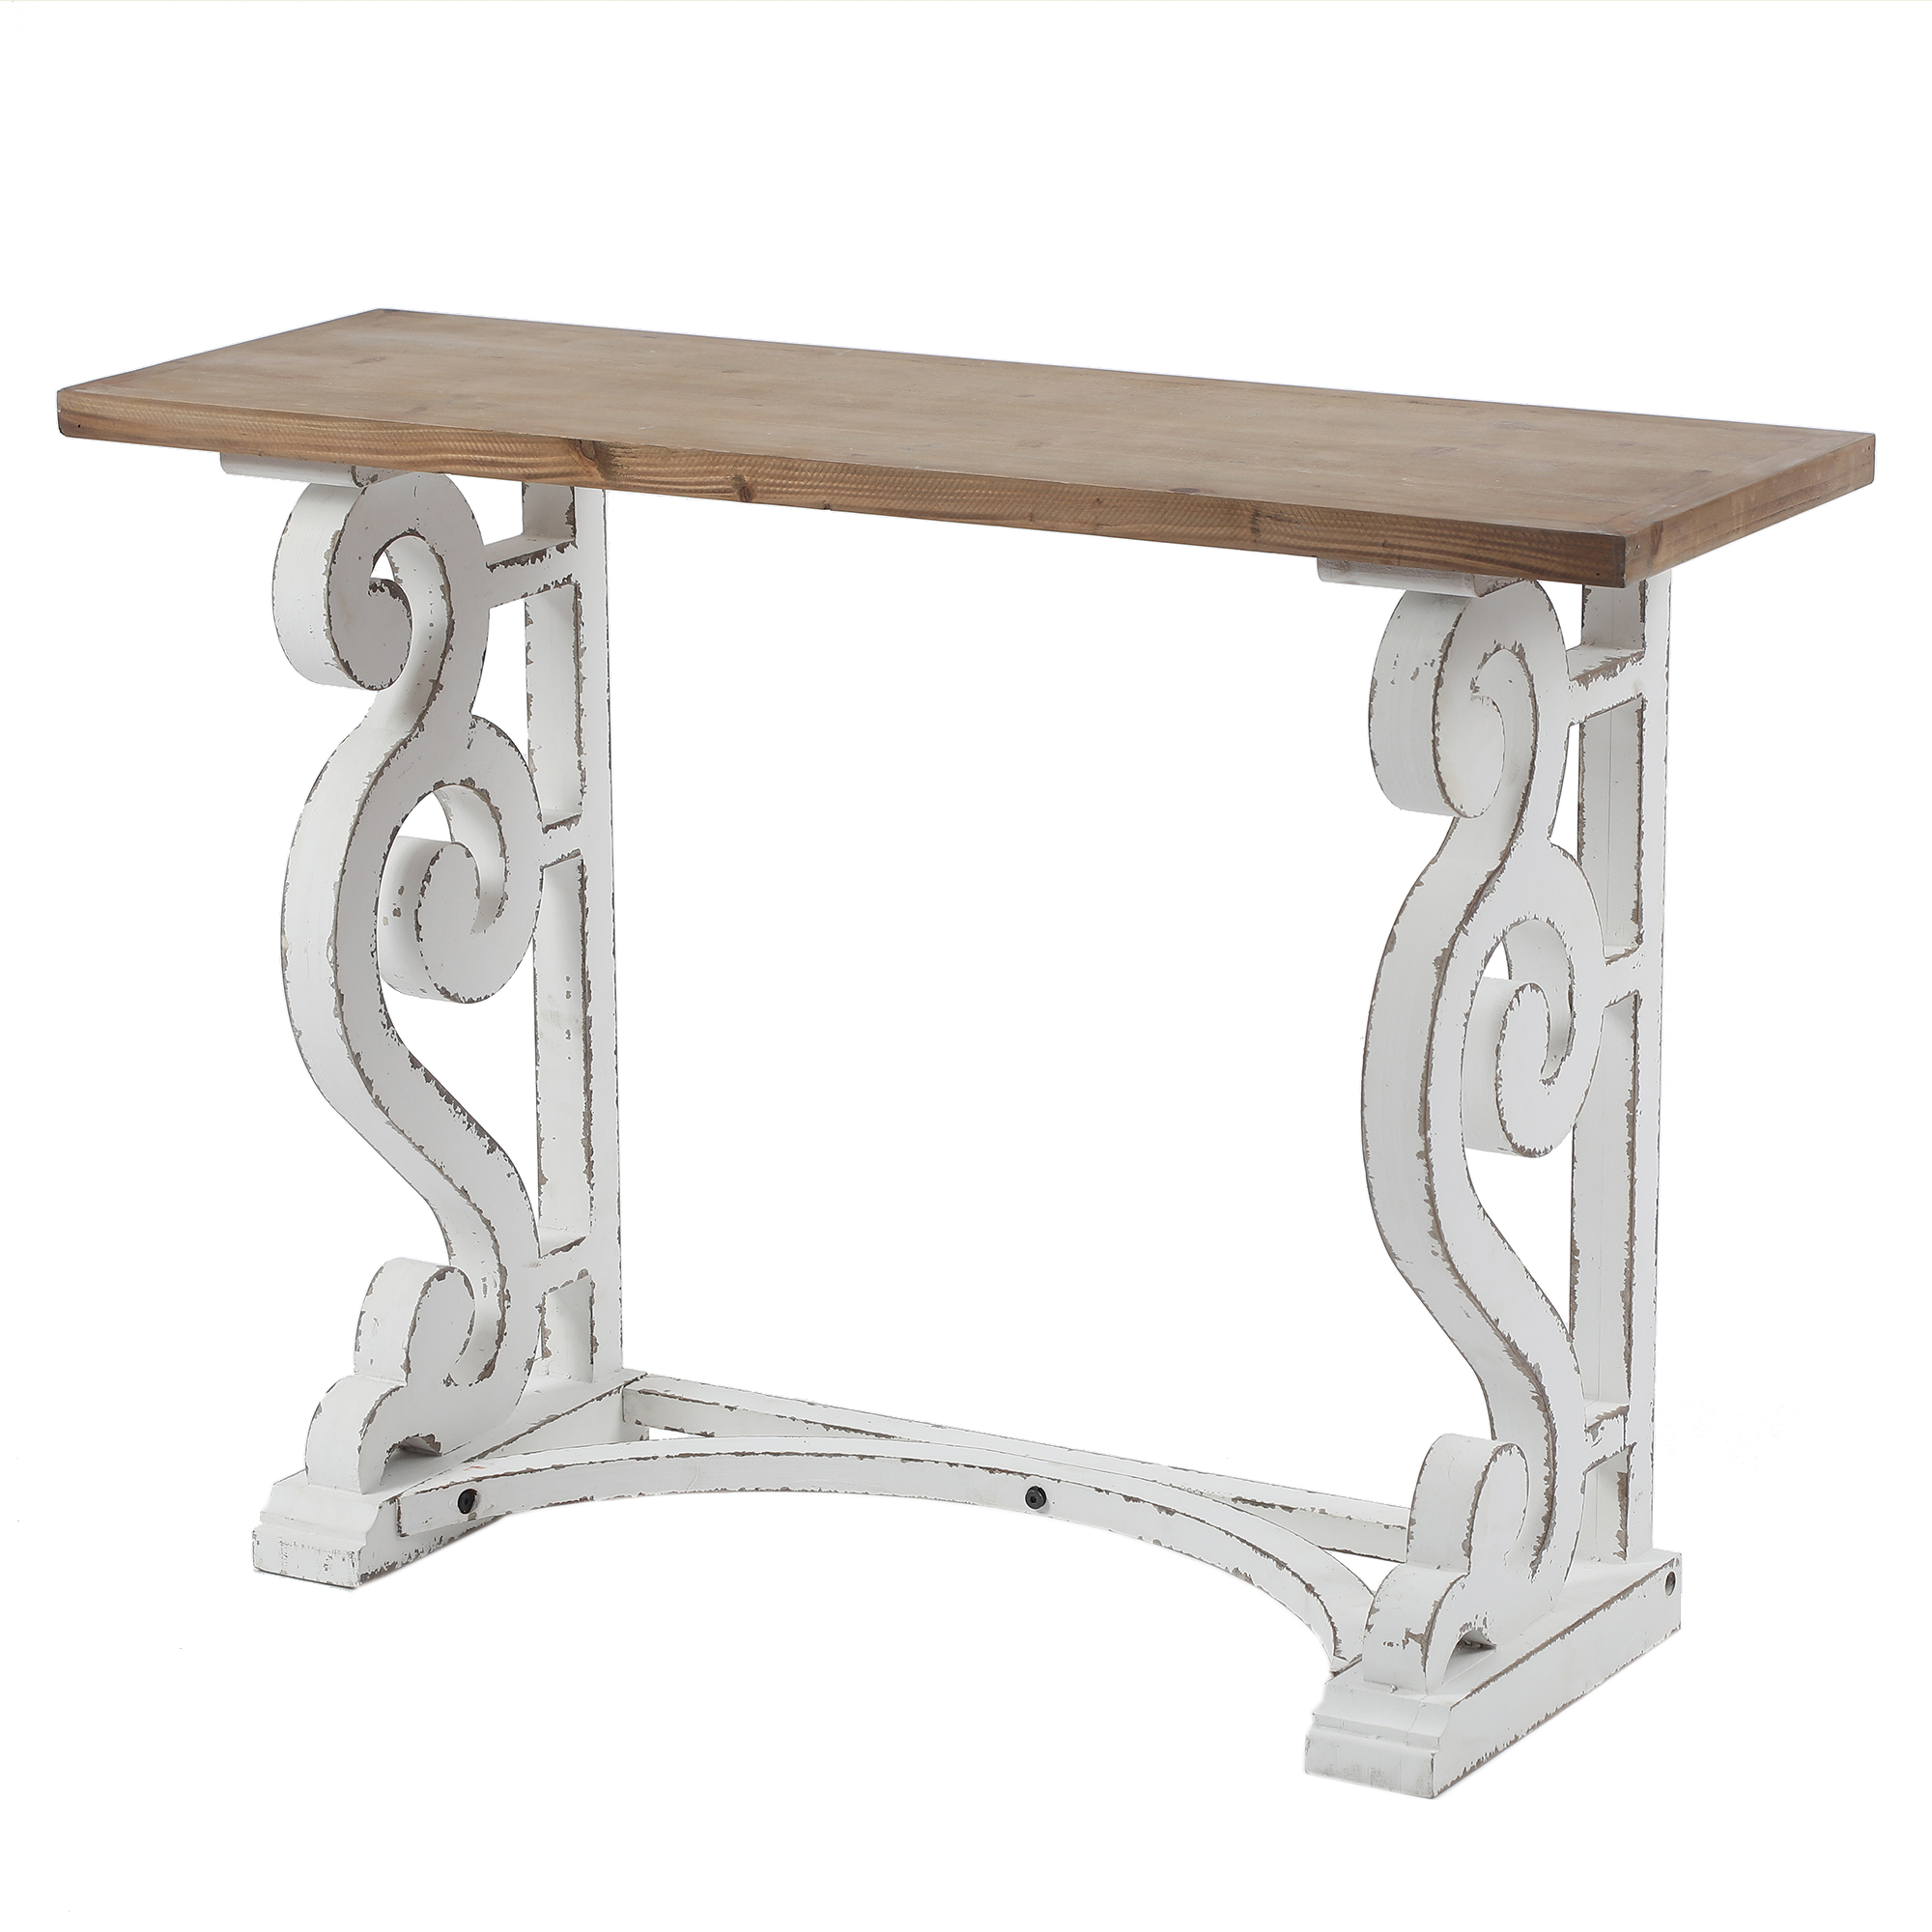 Whif776 Wood Rustic Vintage Console & Entry Table